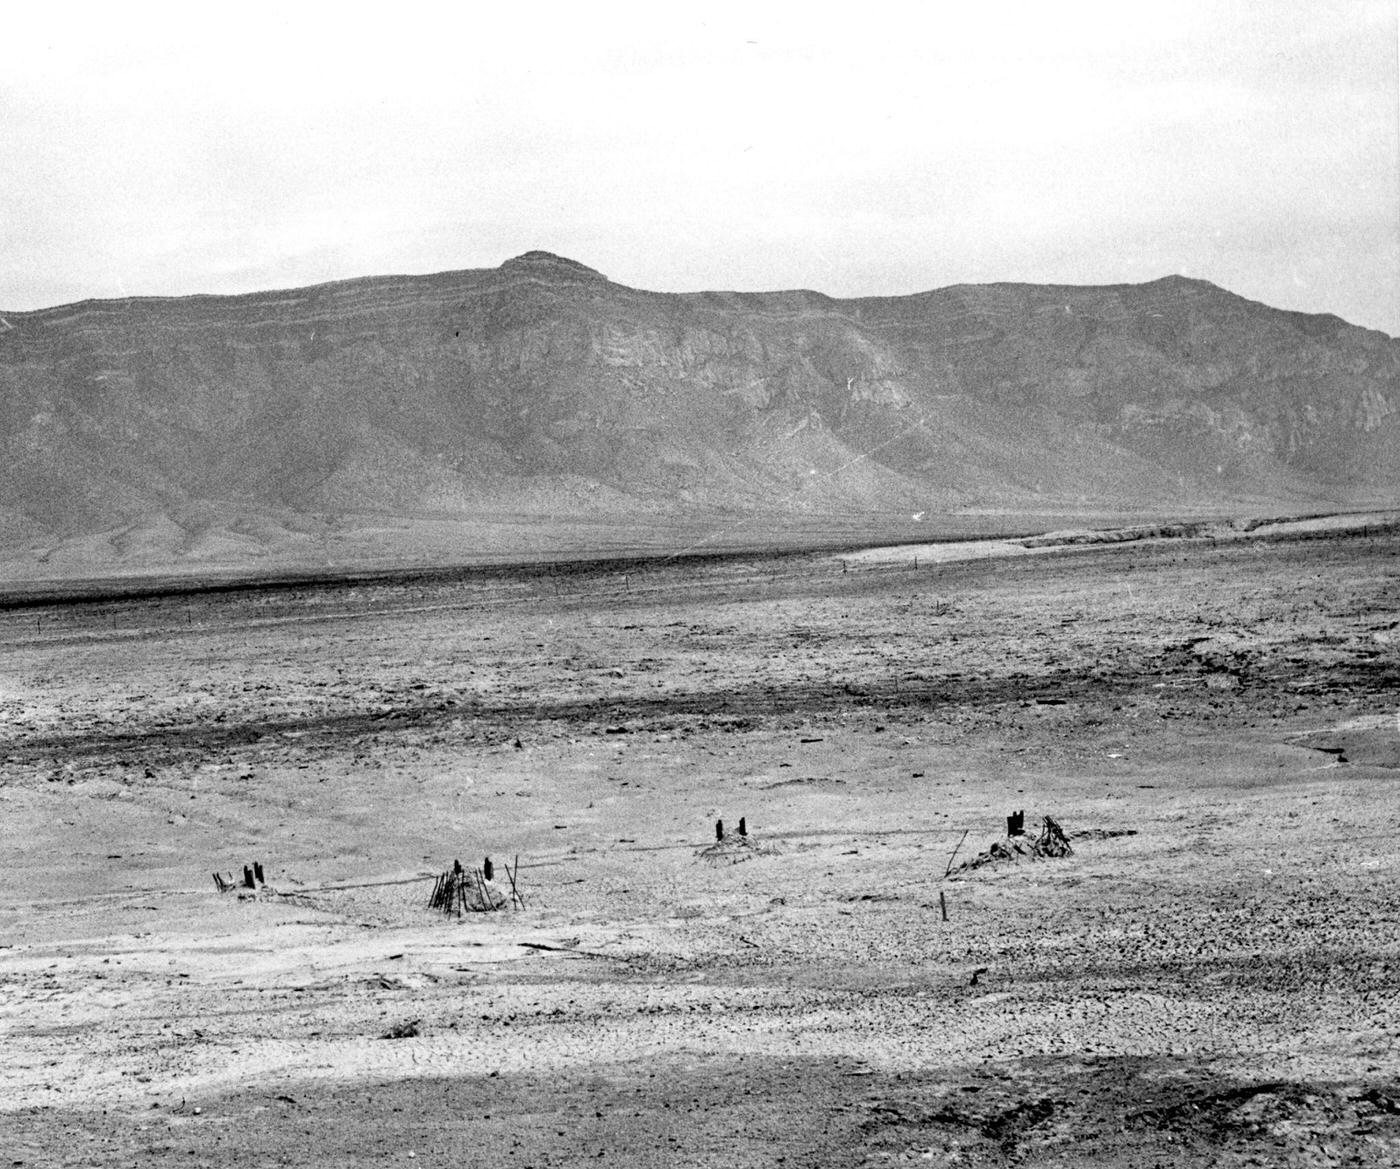 Trinity Site, Ground zero after first nuclear test, New Mexico, 1945